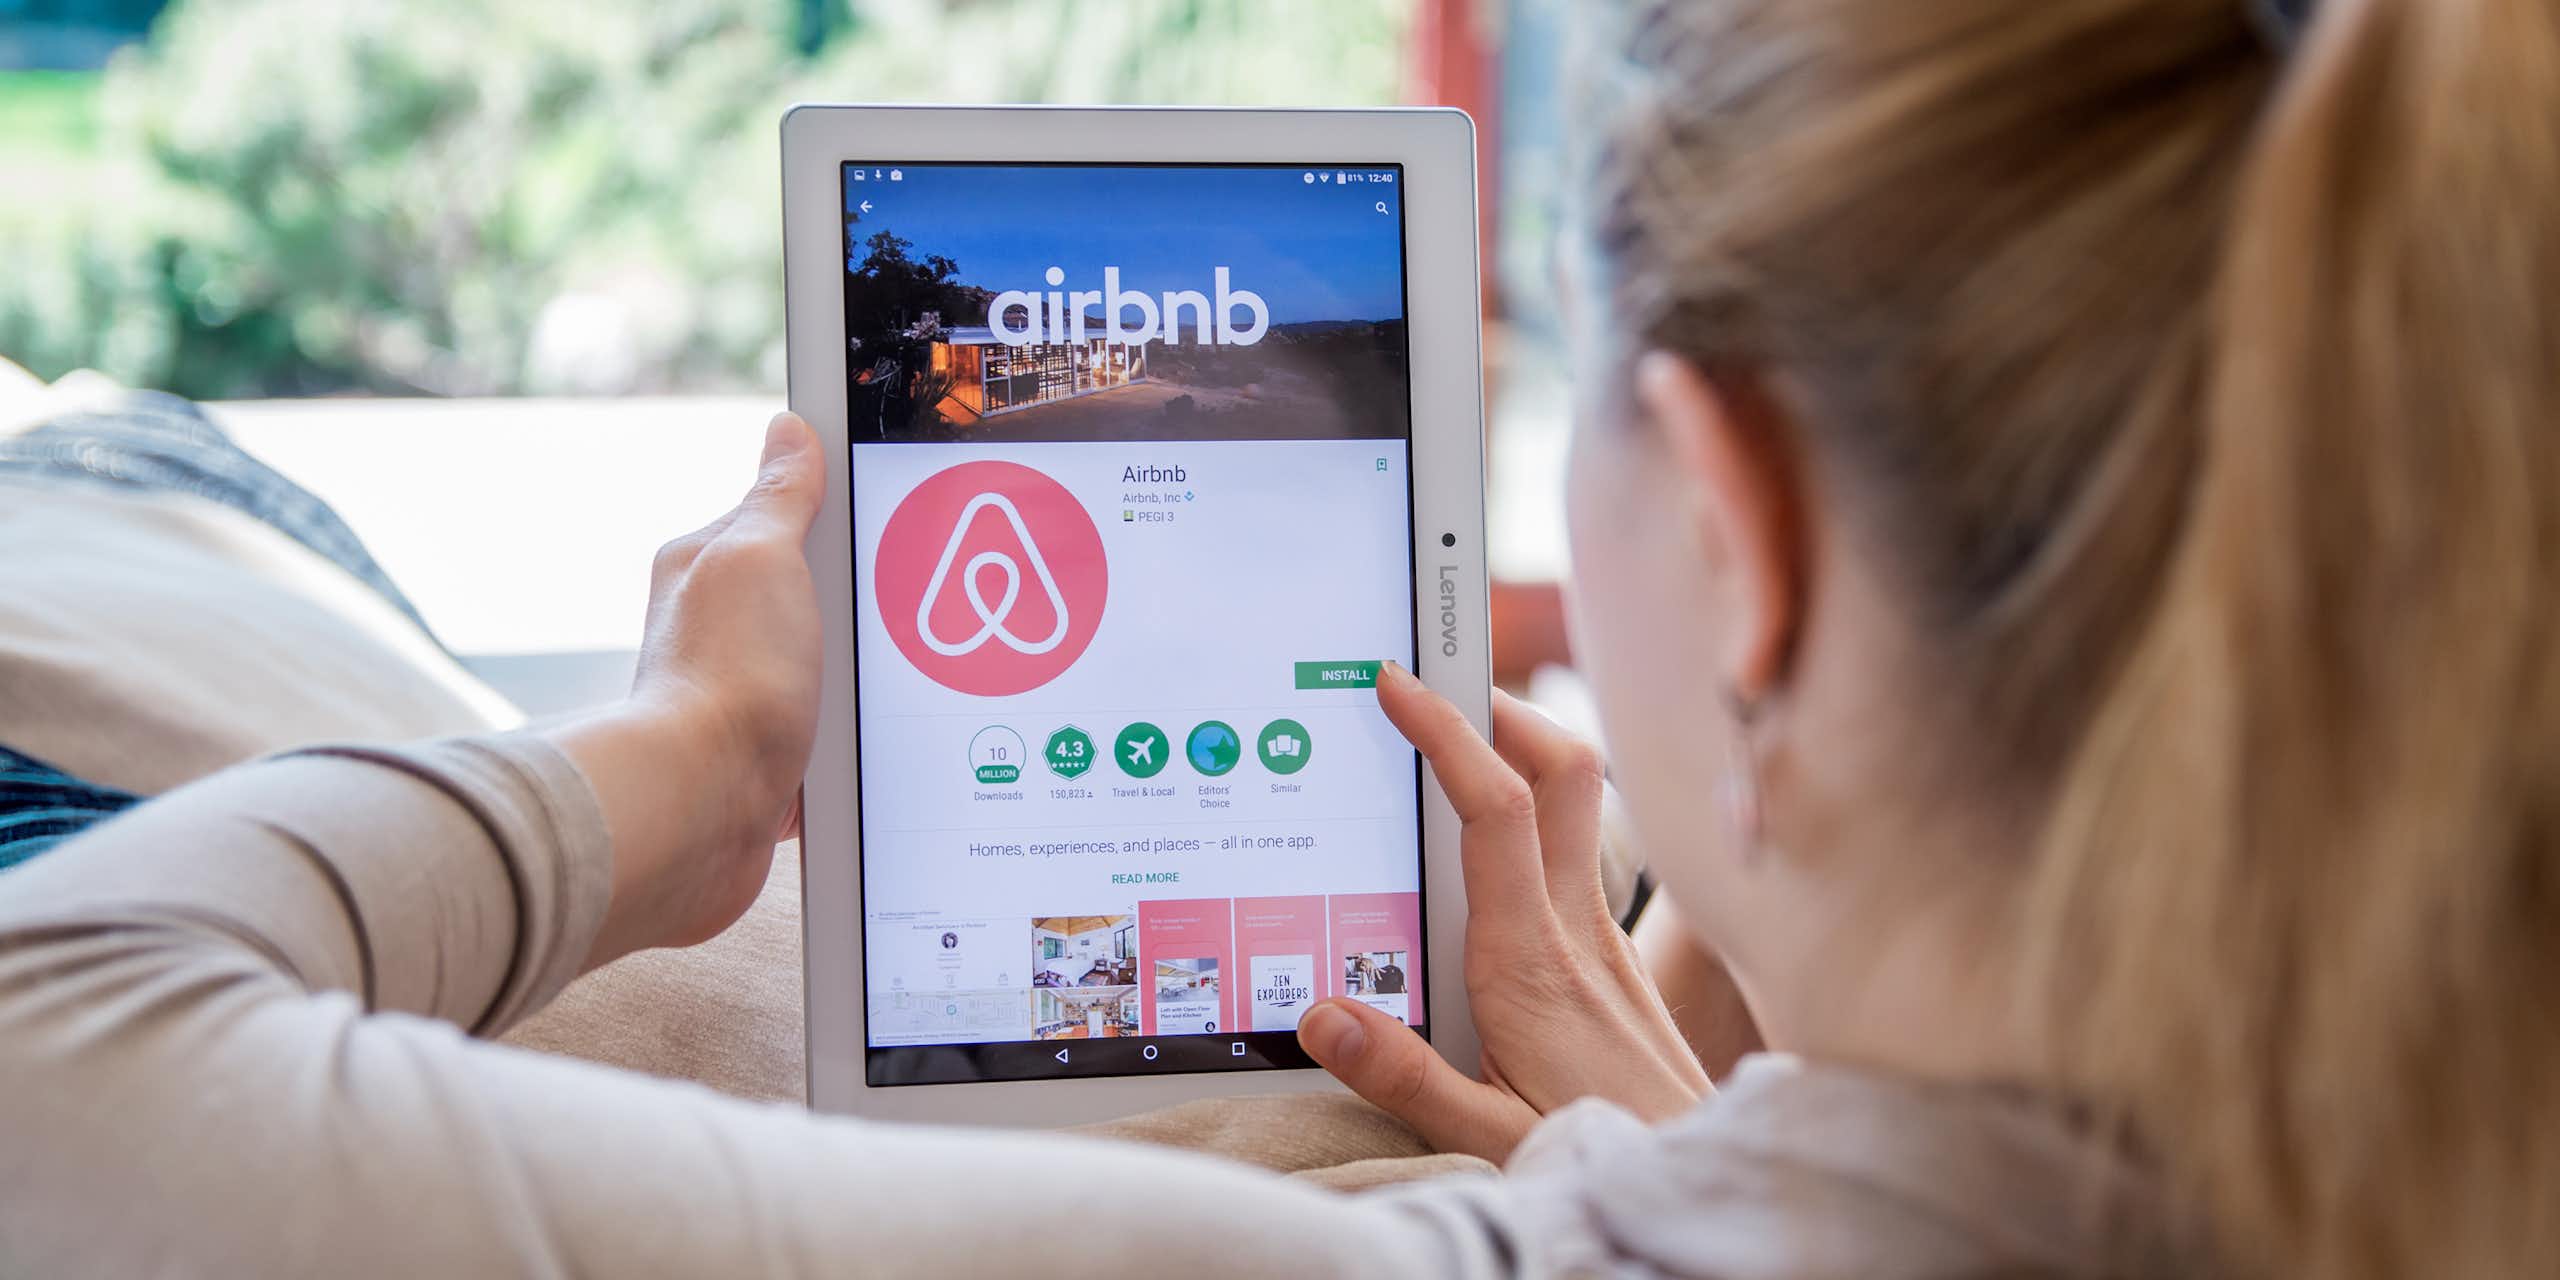 A woman using the Airbnb app on an ipad